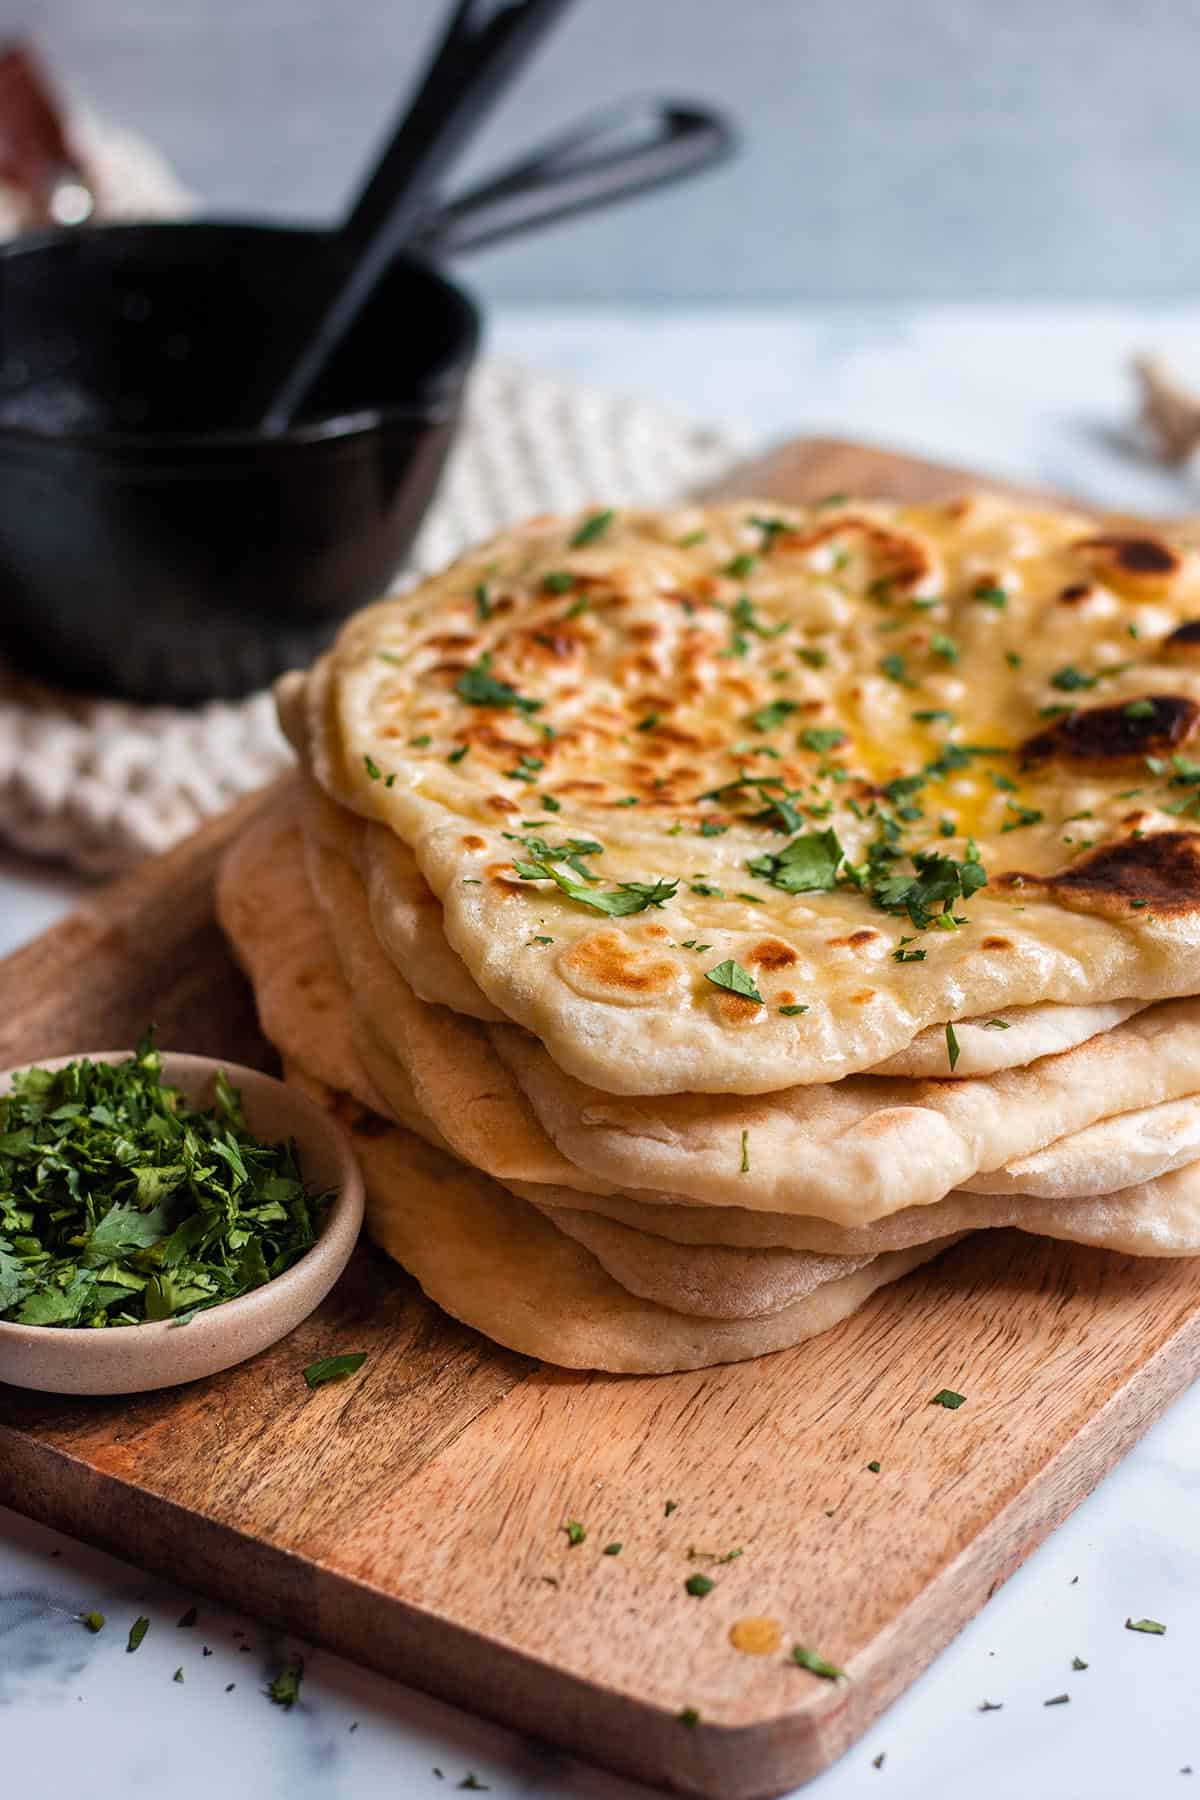 Naan flatbread with fresh parsley and melted butter on a wooden board.